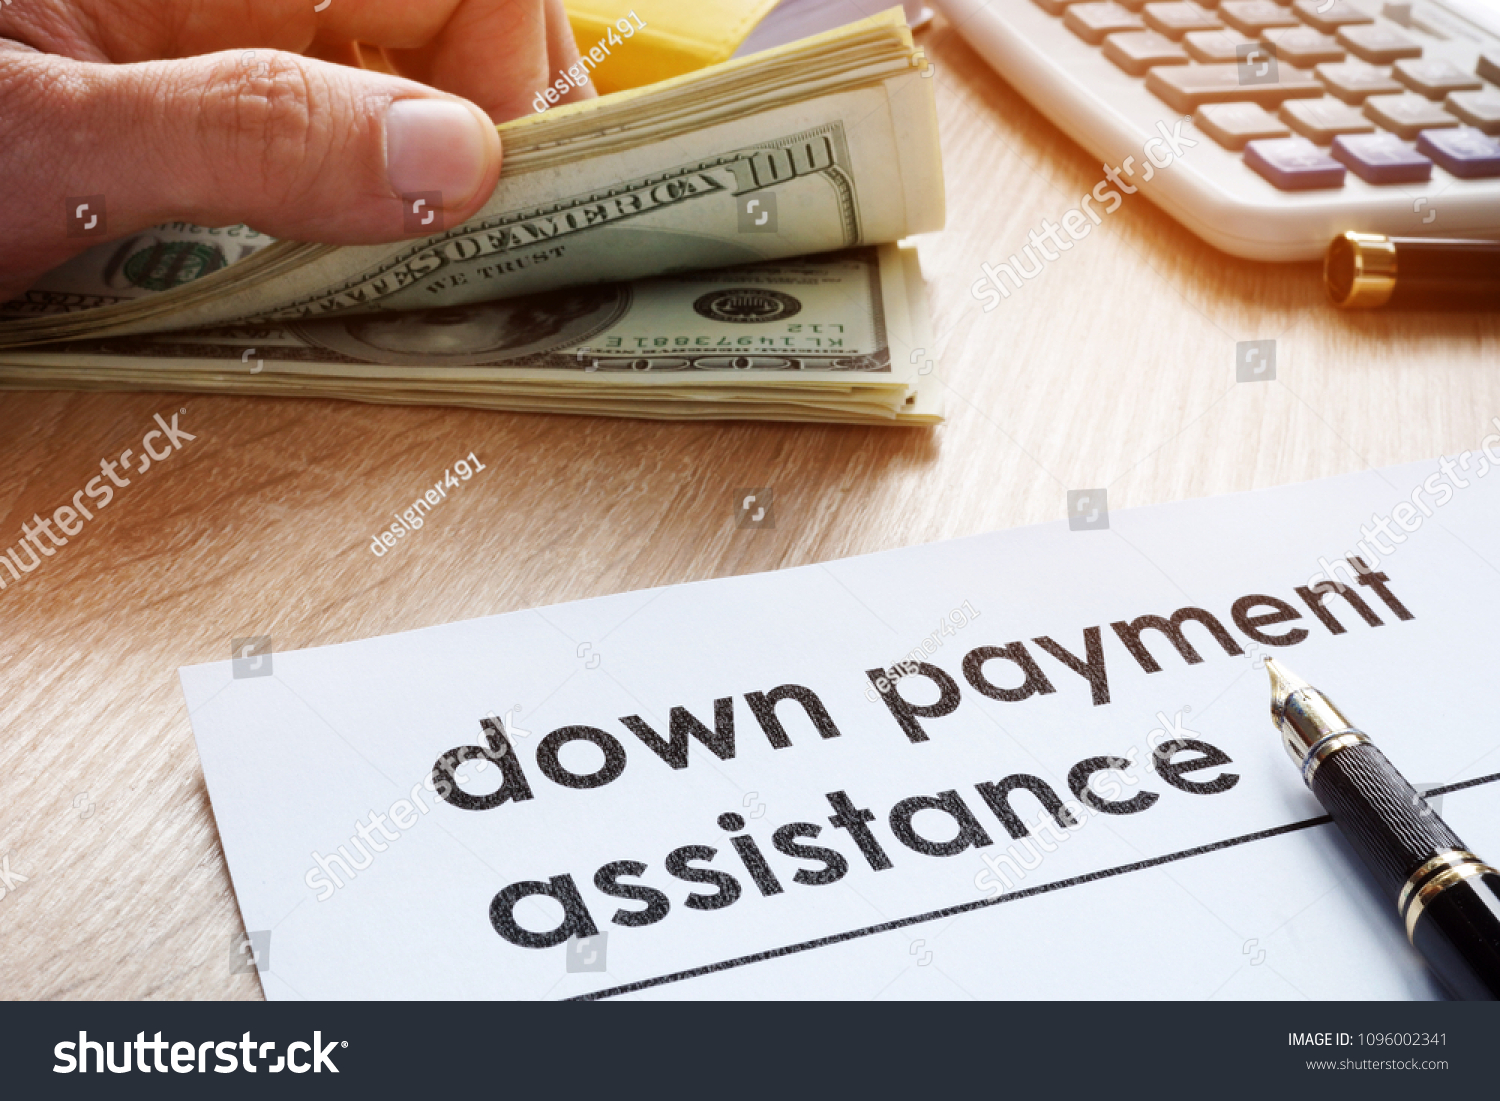 Down payment assistance form and dollar banknotes. #1096002341